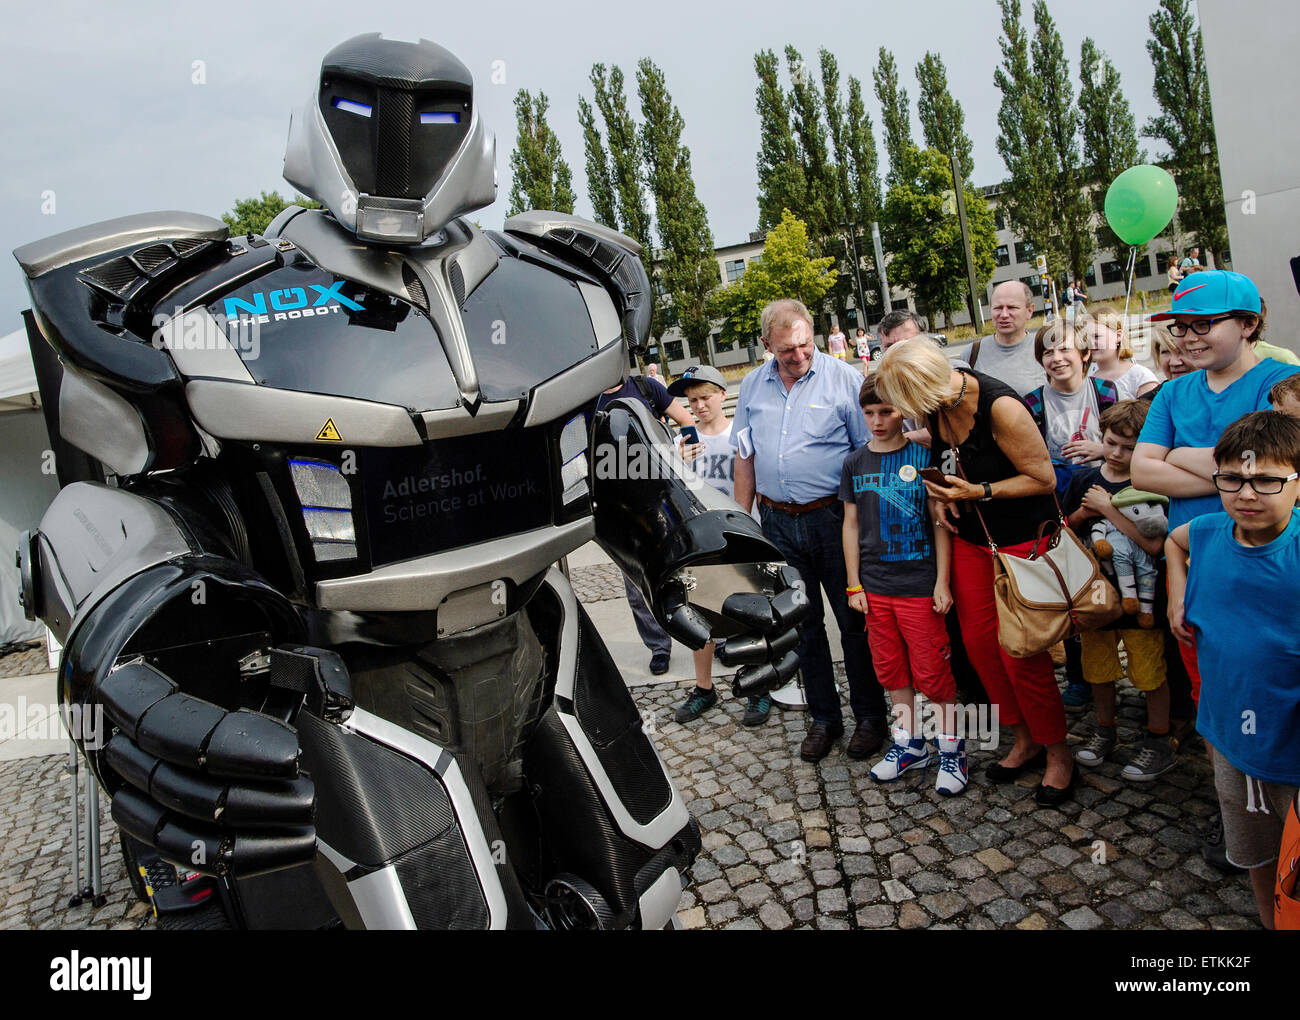 Berlin, Germany. 13th June, 2015. 'NOX the Robot' welcomes visitors to the  Long NIght of the